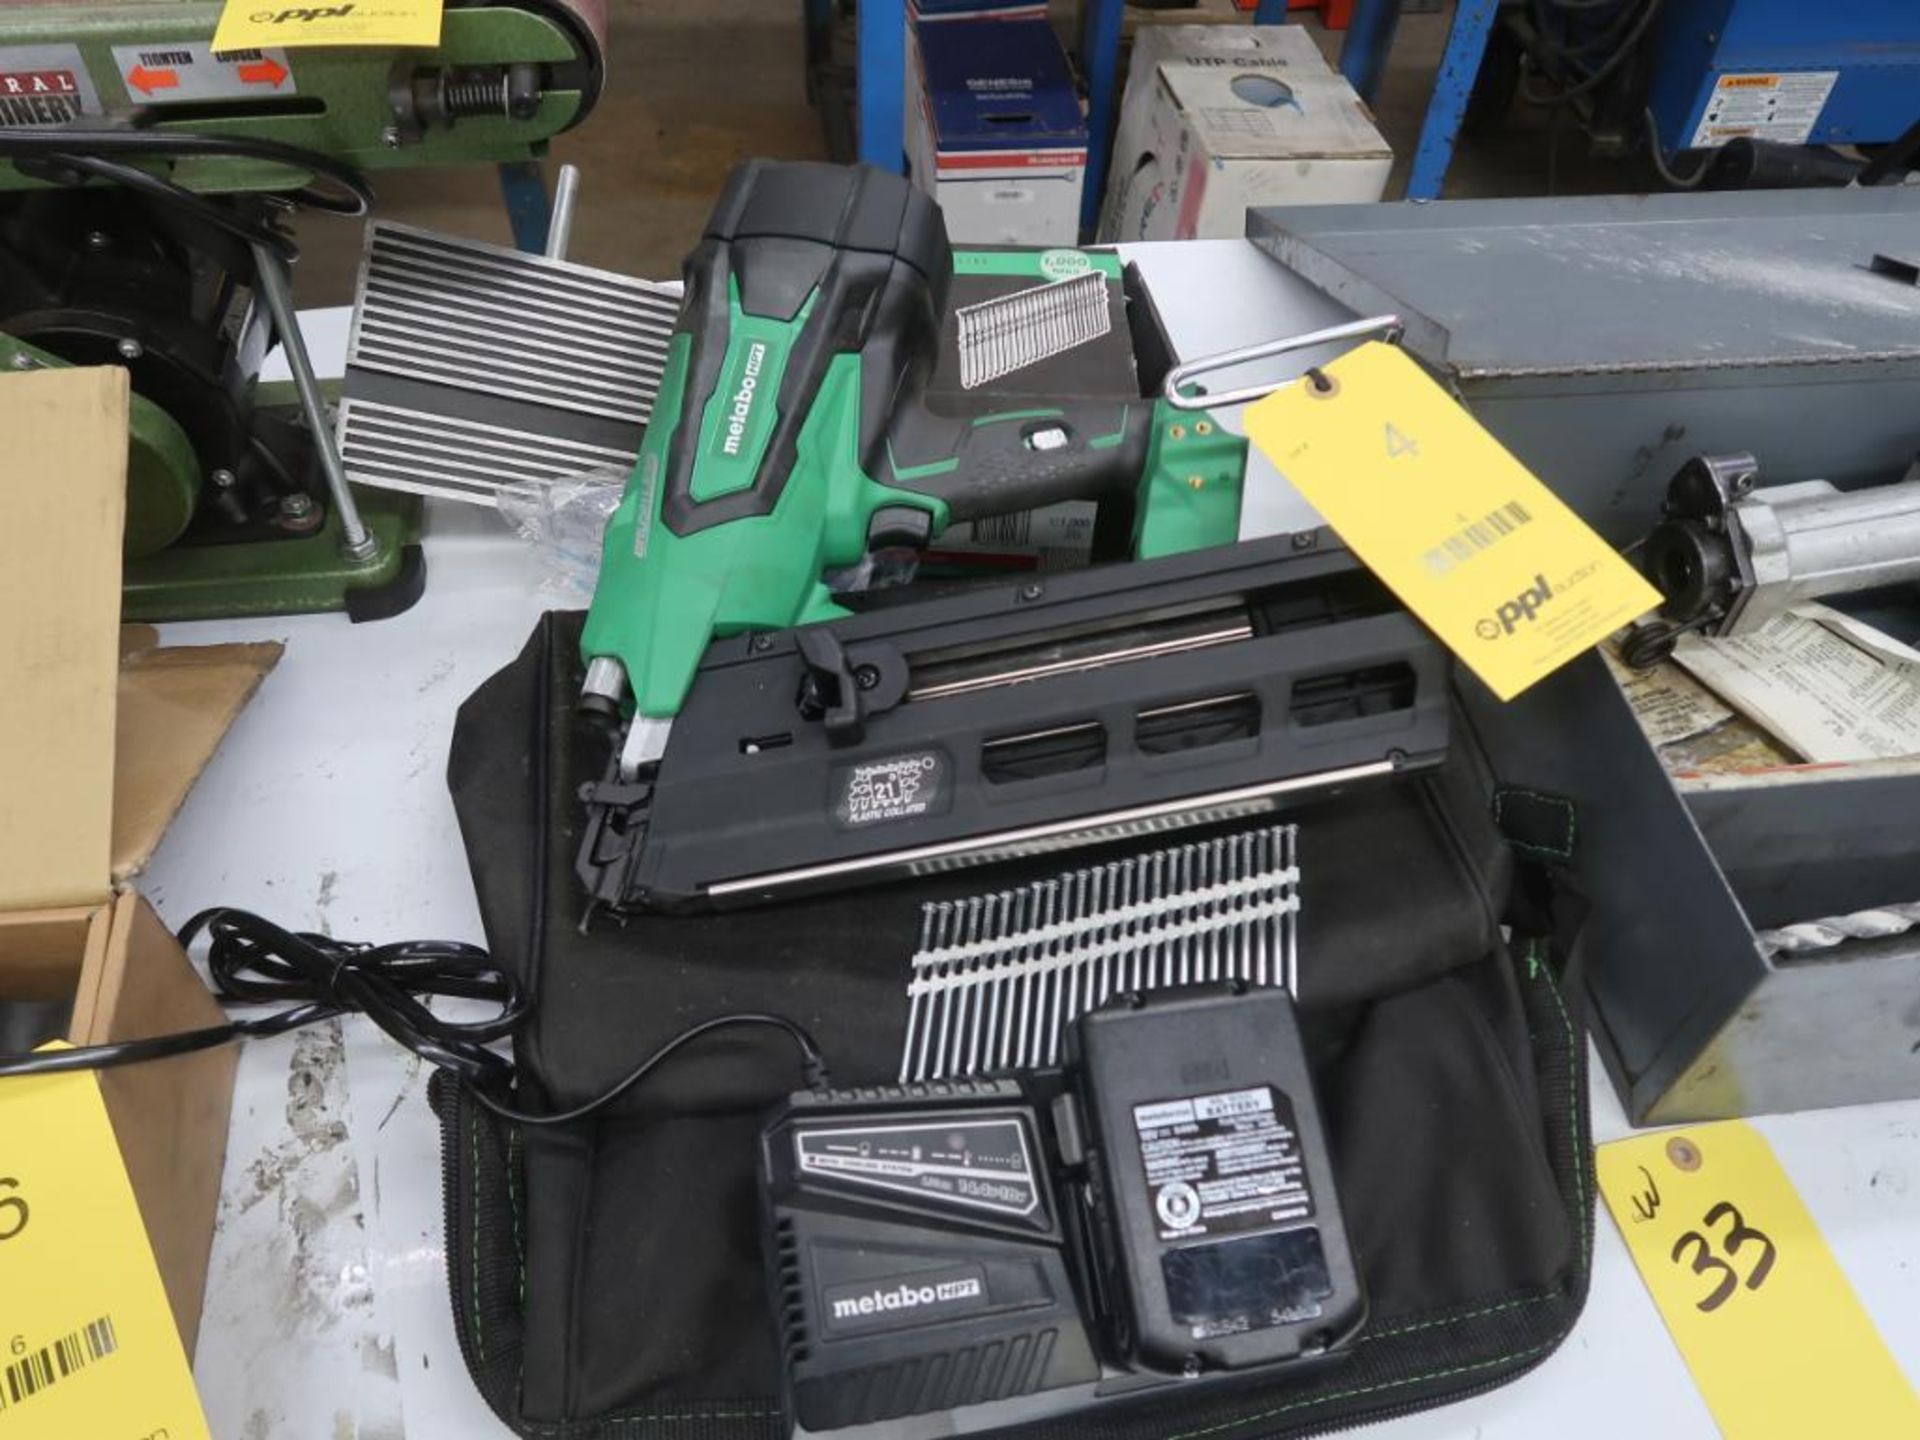 Metabo NR 1890 DR Battery Operated Strip Nailer (LOCATION: 39 PEARCE INDUSTRIAL RD., SHELBYVILLE, KY